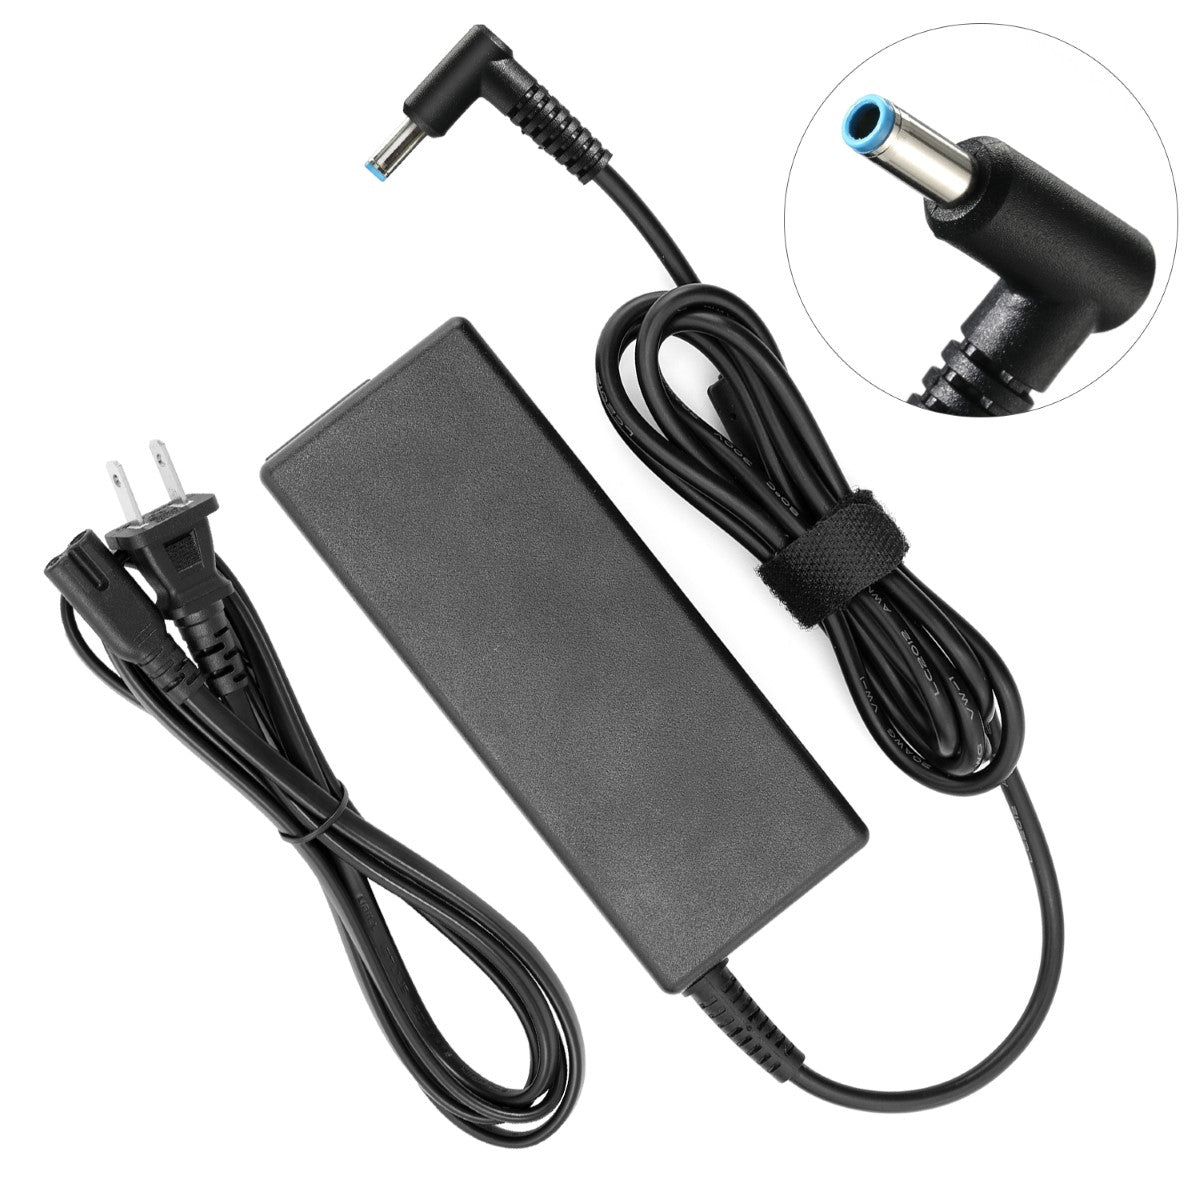 AC Adapter Charger for HP Spectre x360 Series Notebook.